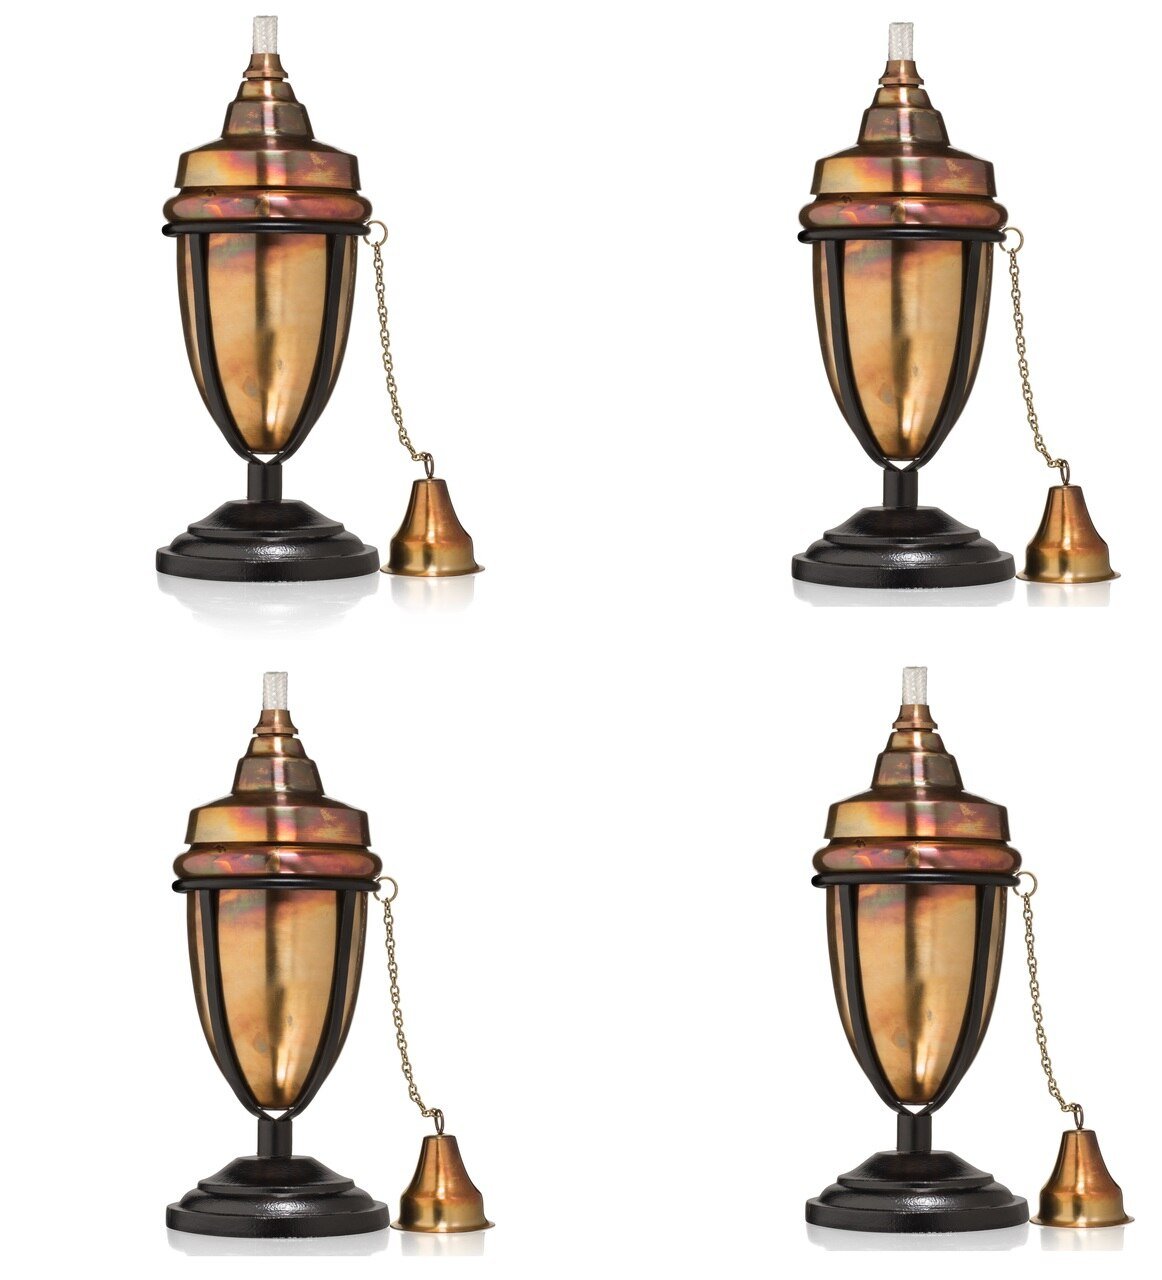 H Potter Rustic Table Top Patio Torch Rustic Copper Finish Set of Four